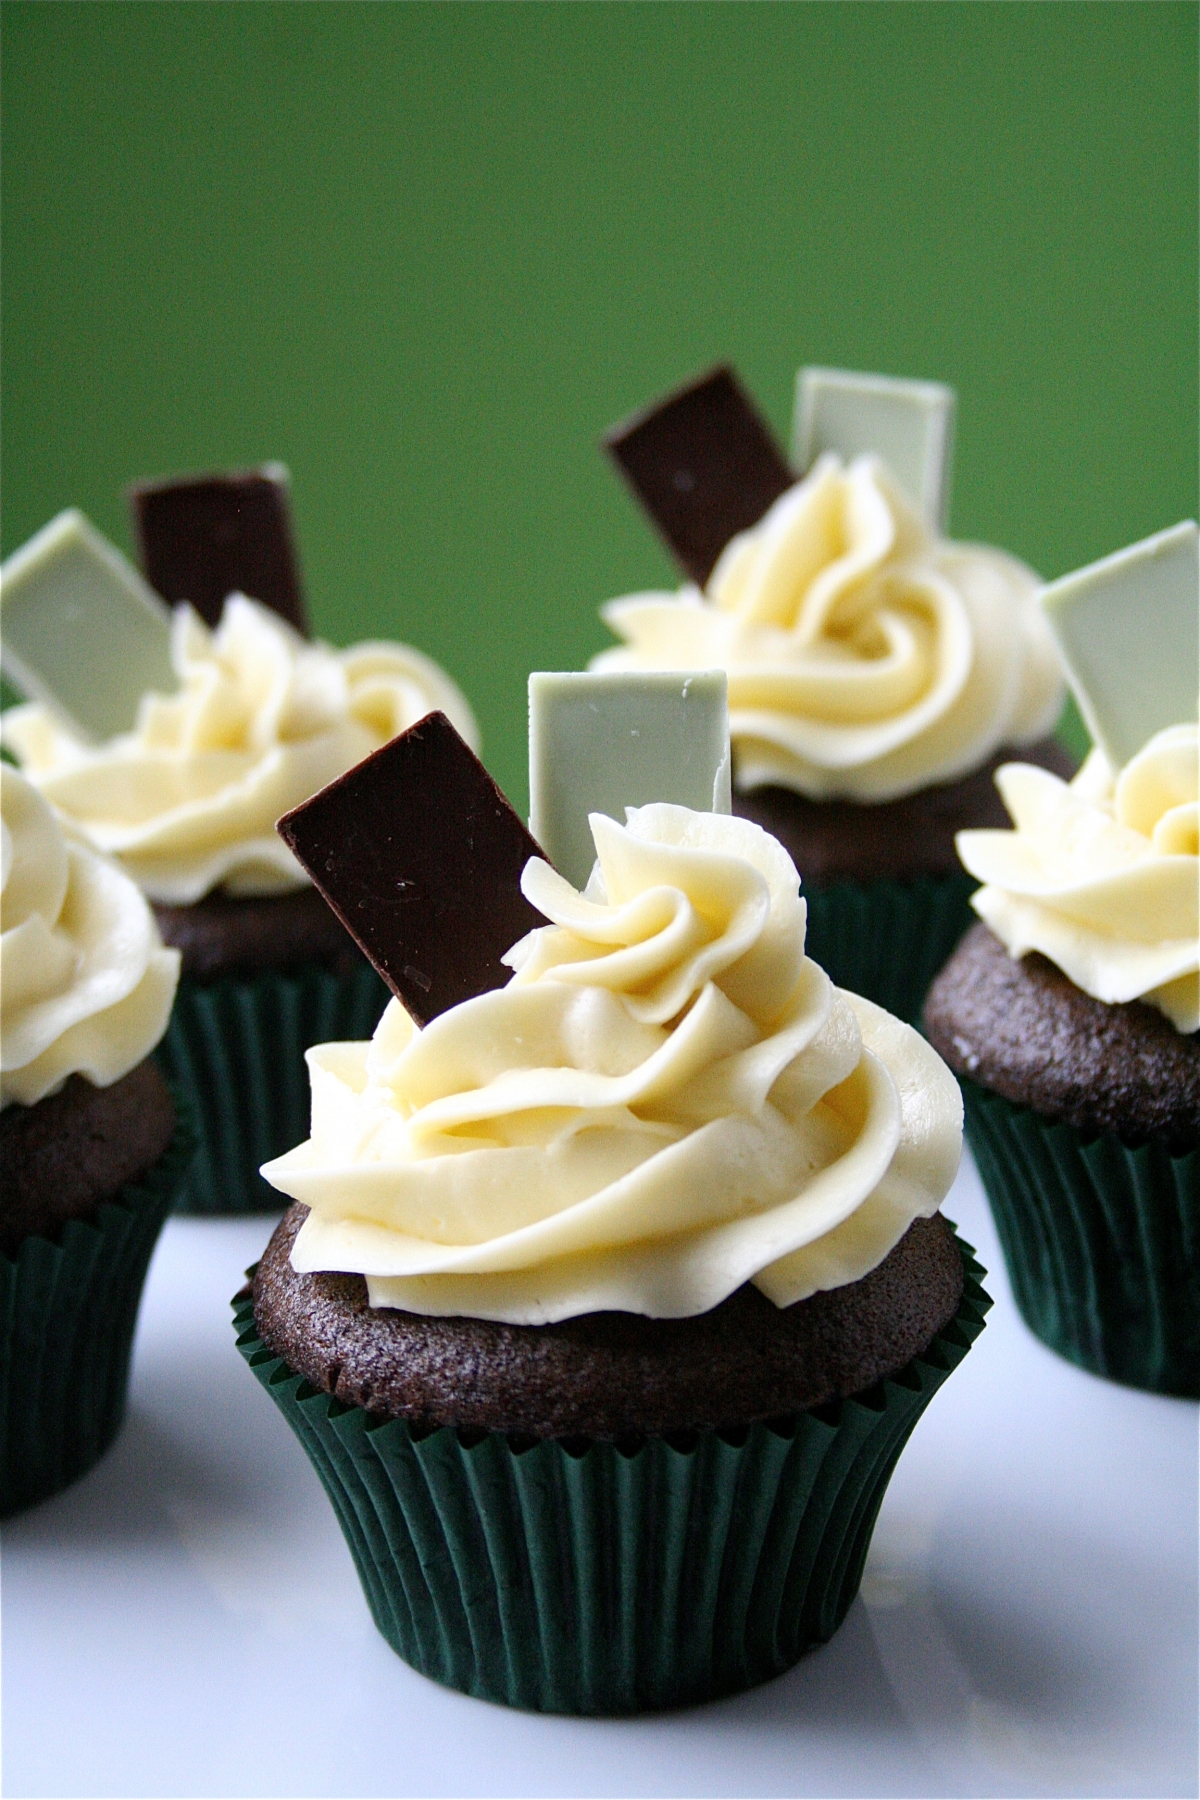 Mint Chocolate Cupcakes | The Curvy Carrot